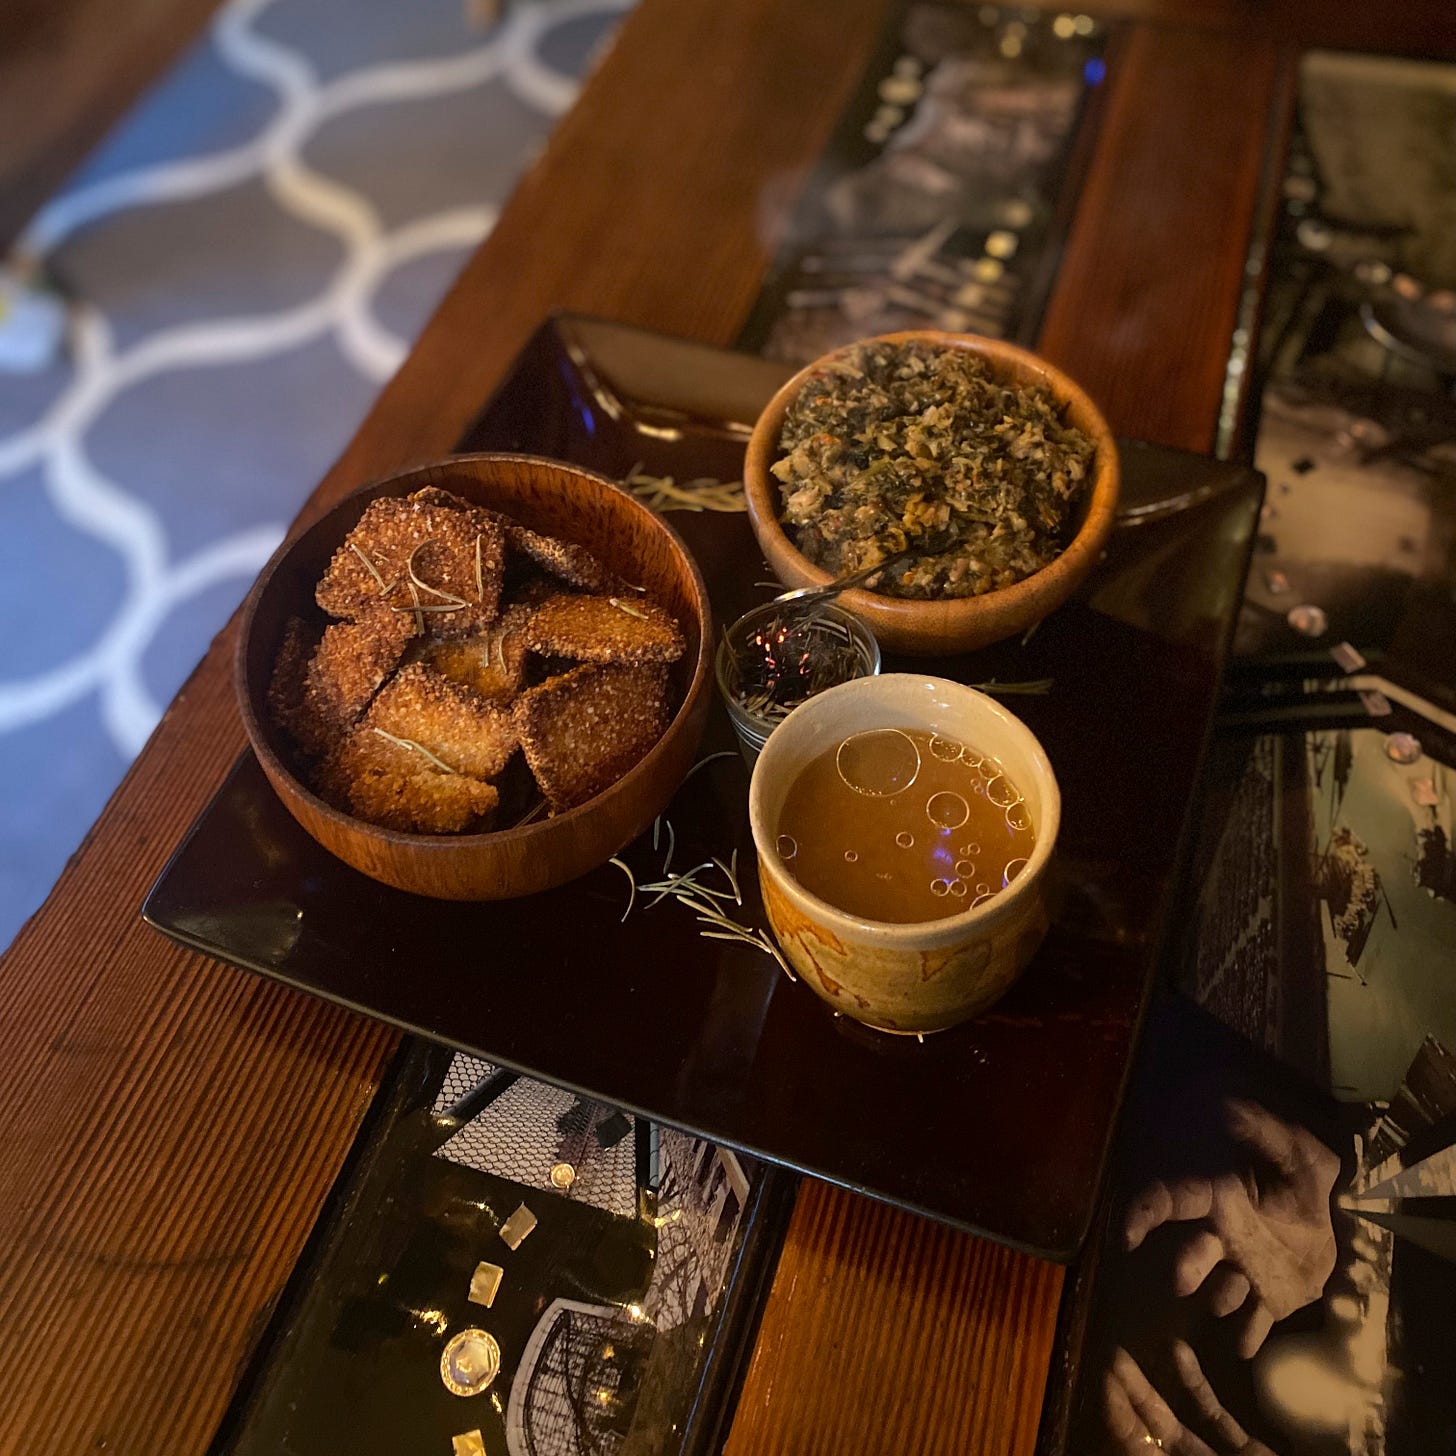 A square black plate with two small wooden bowls, a cup of broth with oil floated on top, and a small glass cup of incense. The bowl in the foreground holds square quinoa crackers, and the other bowl holds chutney with a spoon in it. The plate is dusted with rosemary.